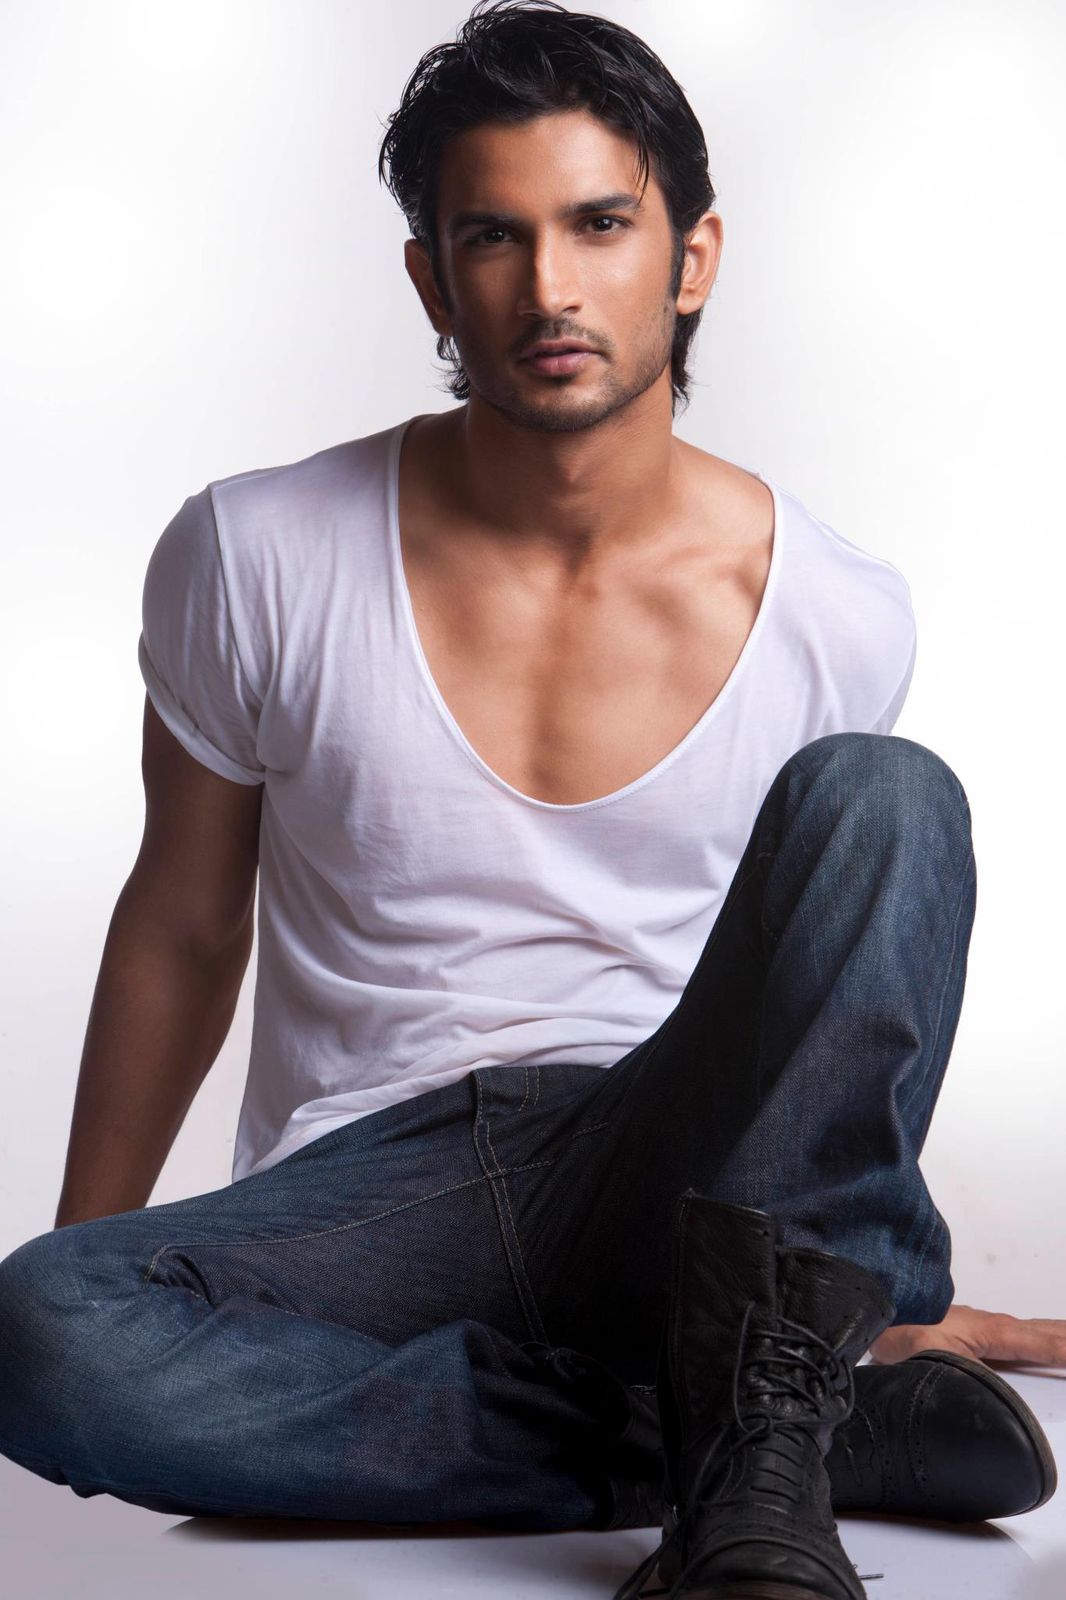 I don’t want to disappoint anyone: Sushant